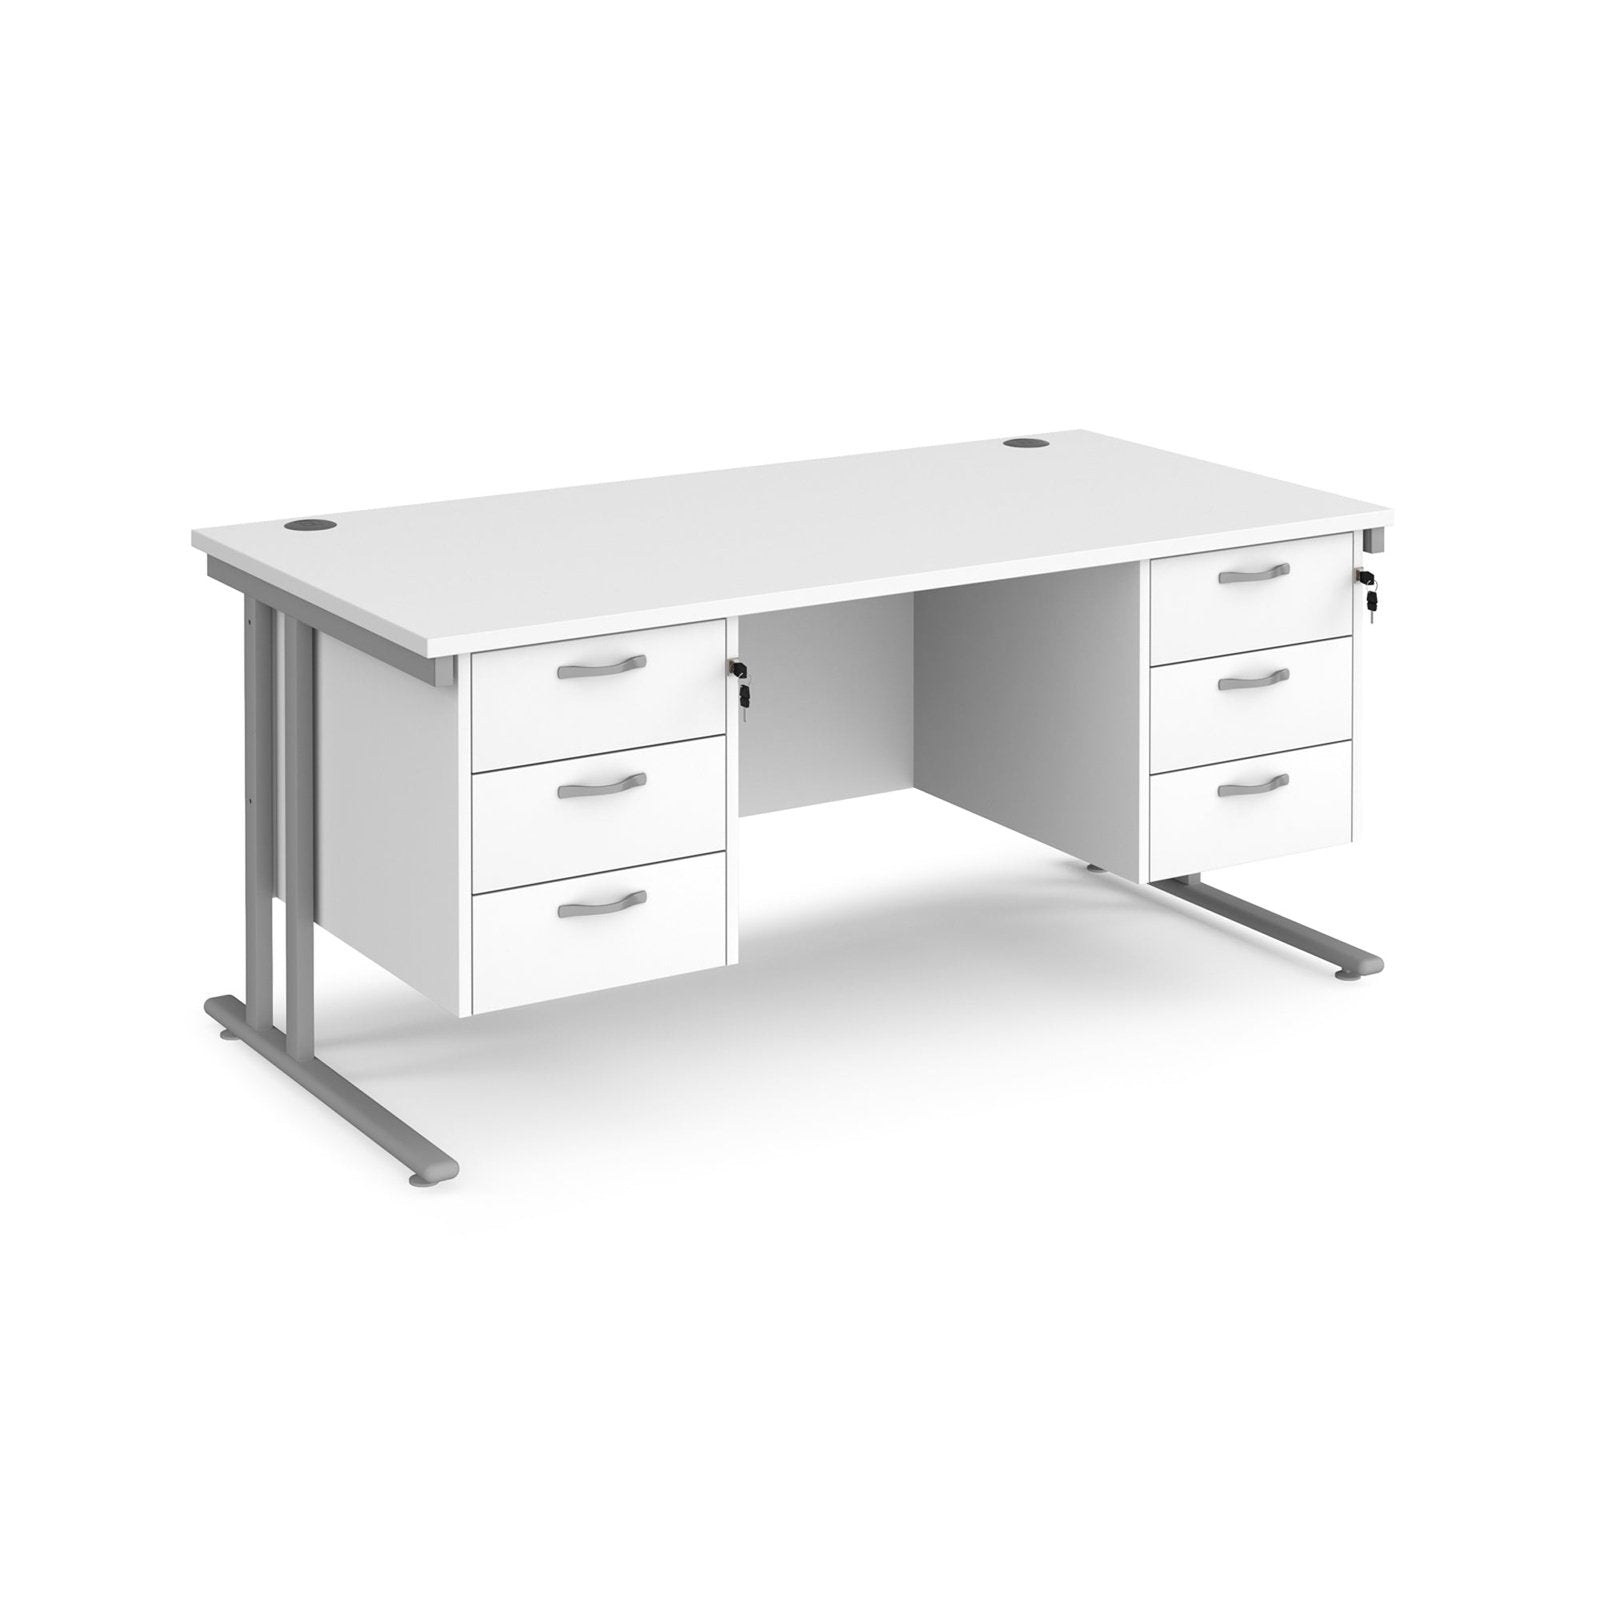 Maestro 25 cantileer leg straight desk 800 deep with two x 3 drawer pedestals - Office Products Online